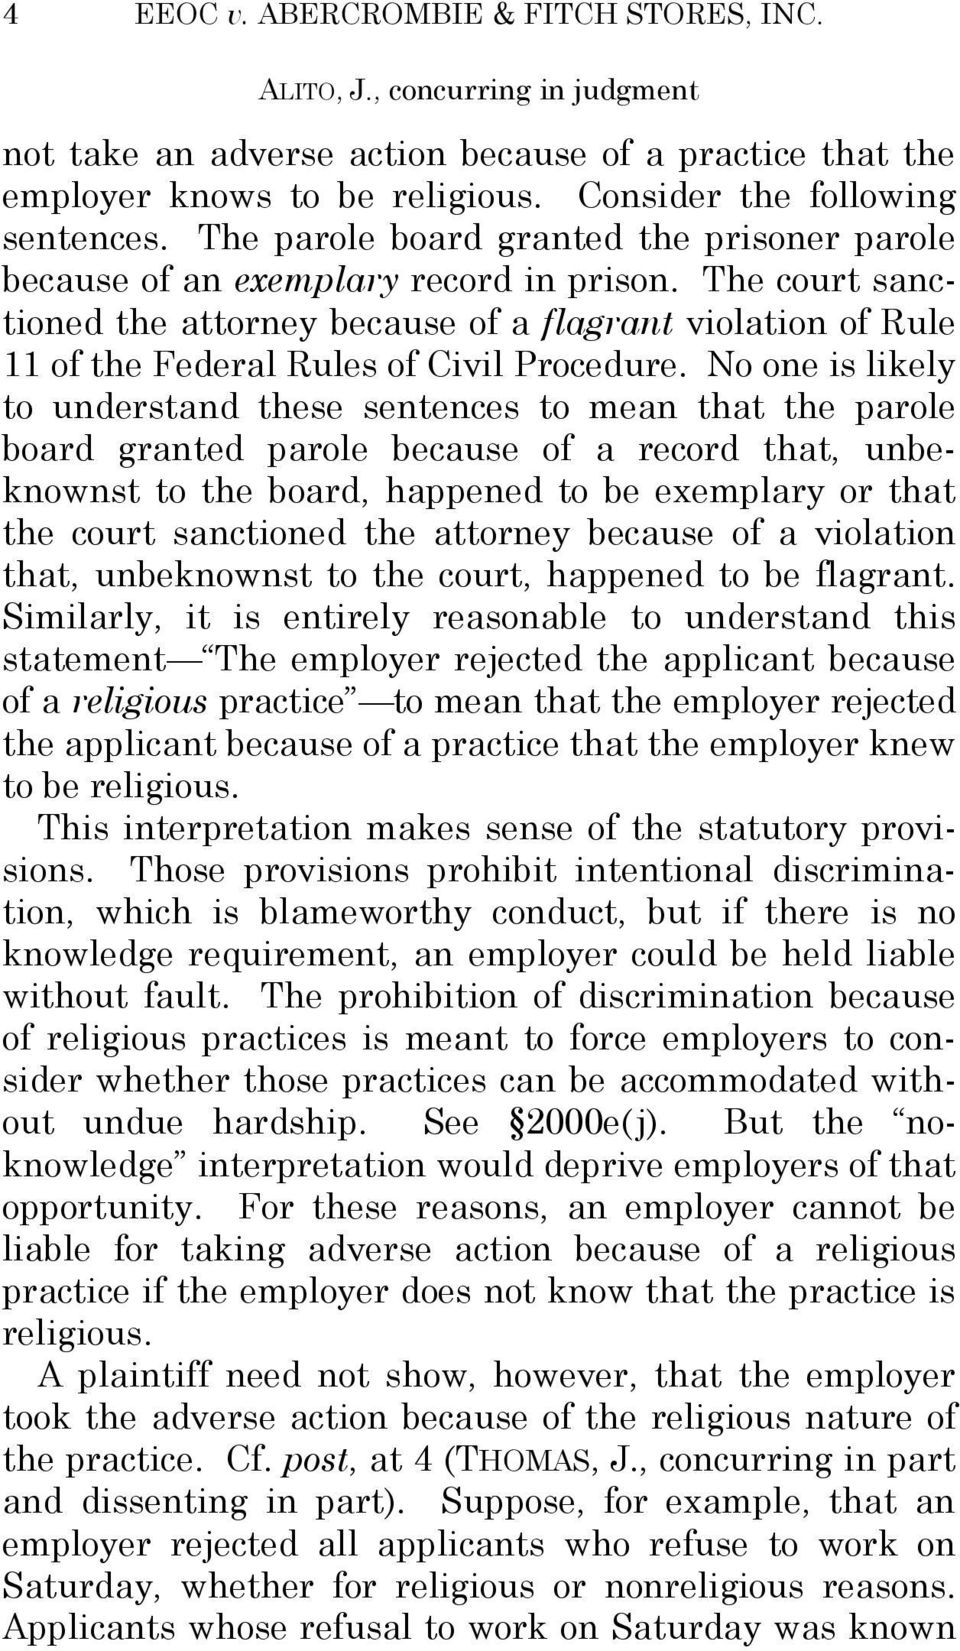 The court sanctioned the attorney because of a flagrant violation of Rule 11 of the Federal Rules of Civil Procedure.